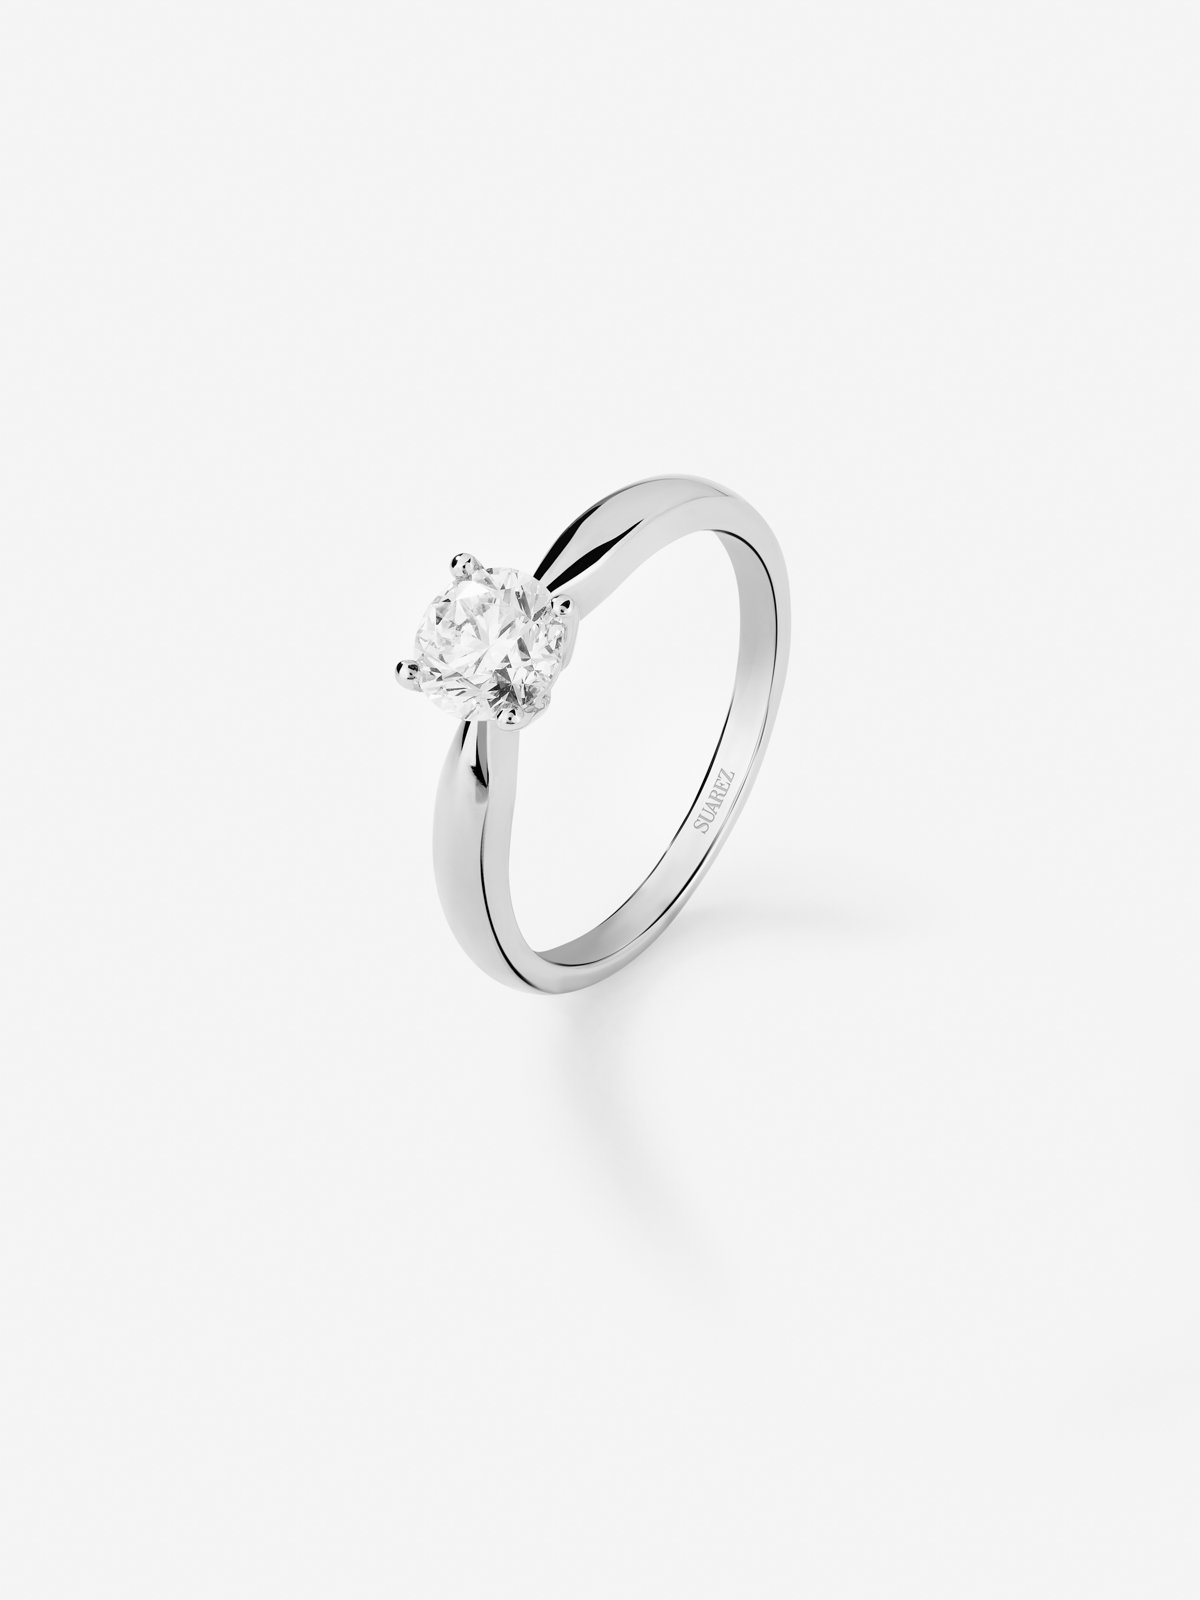 18K White Gold Solitaire Engagement Ring with Diamond